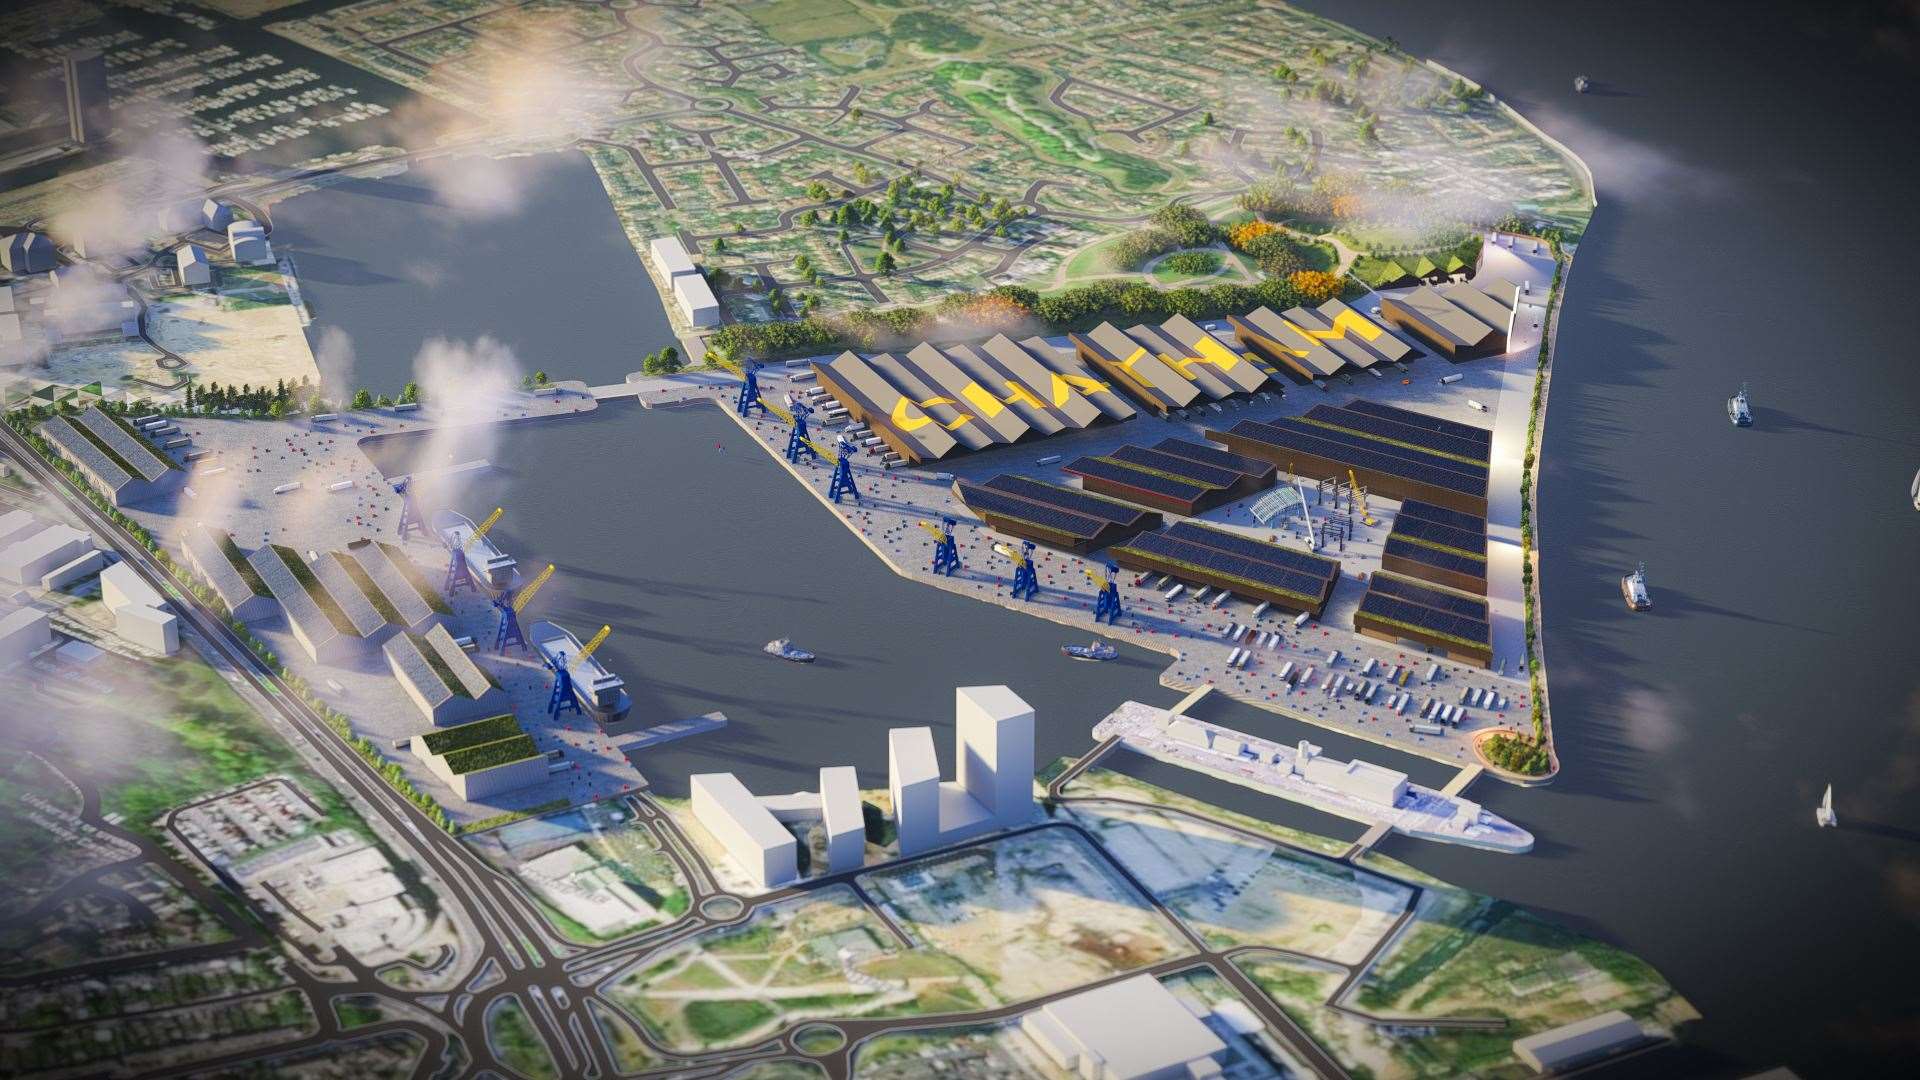 SPPARC architects have designed a masterplan for Chatham Docks. Picture: SPPARC